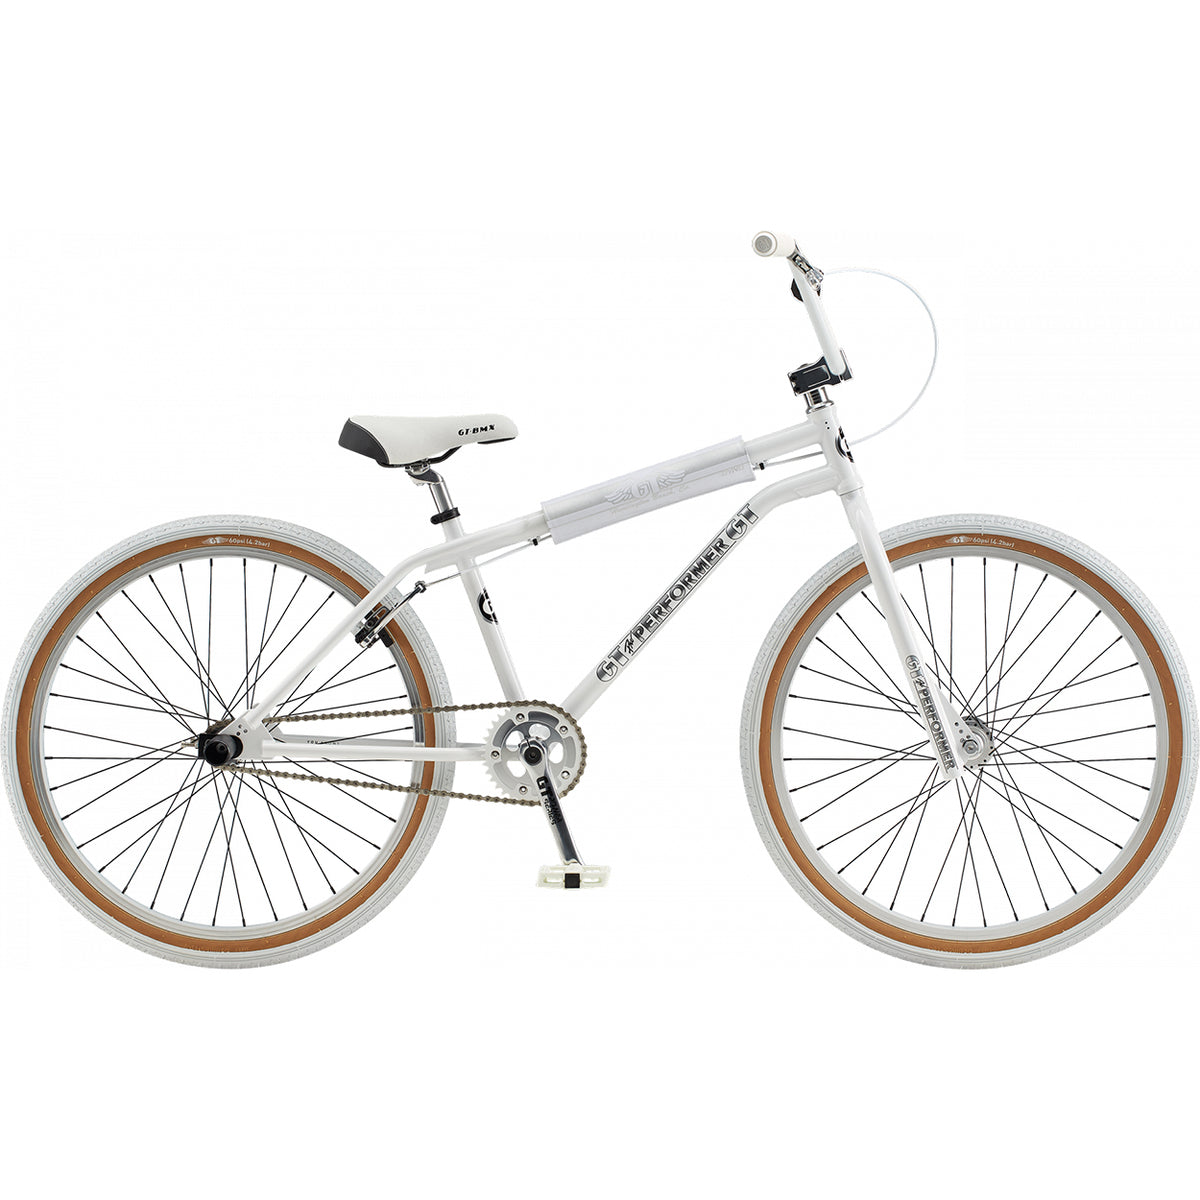 Gt 2020 Pro Performer 26 Heritage Bike White At J R Bicycles